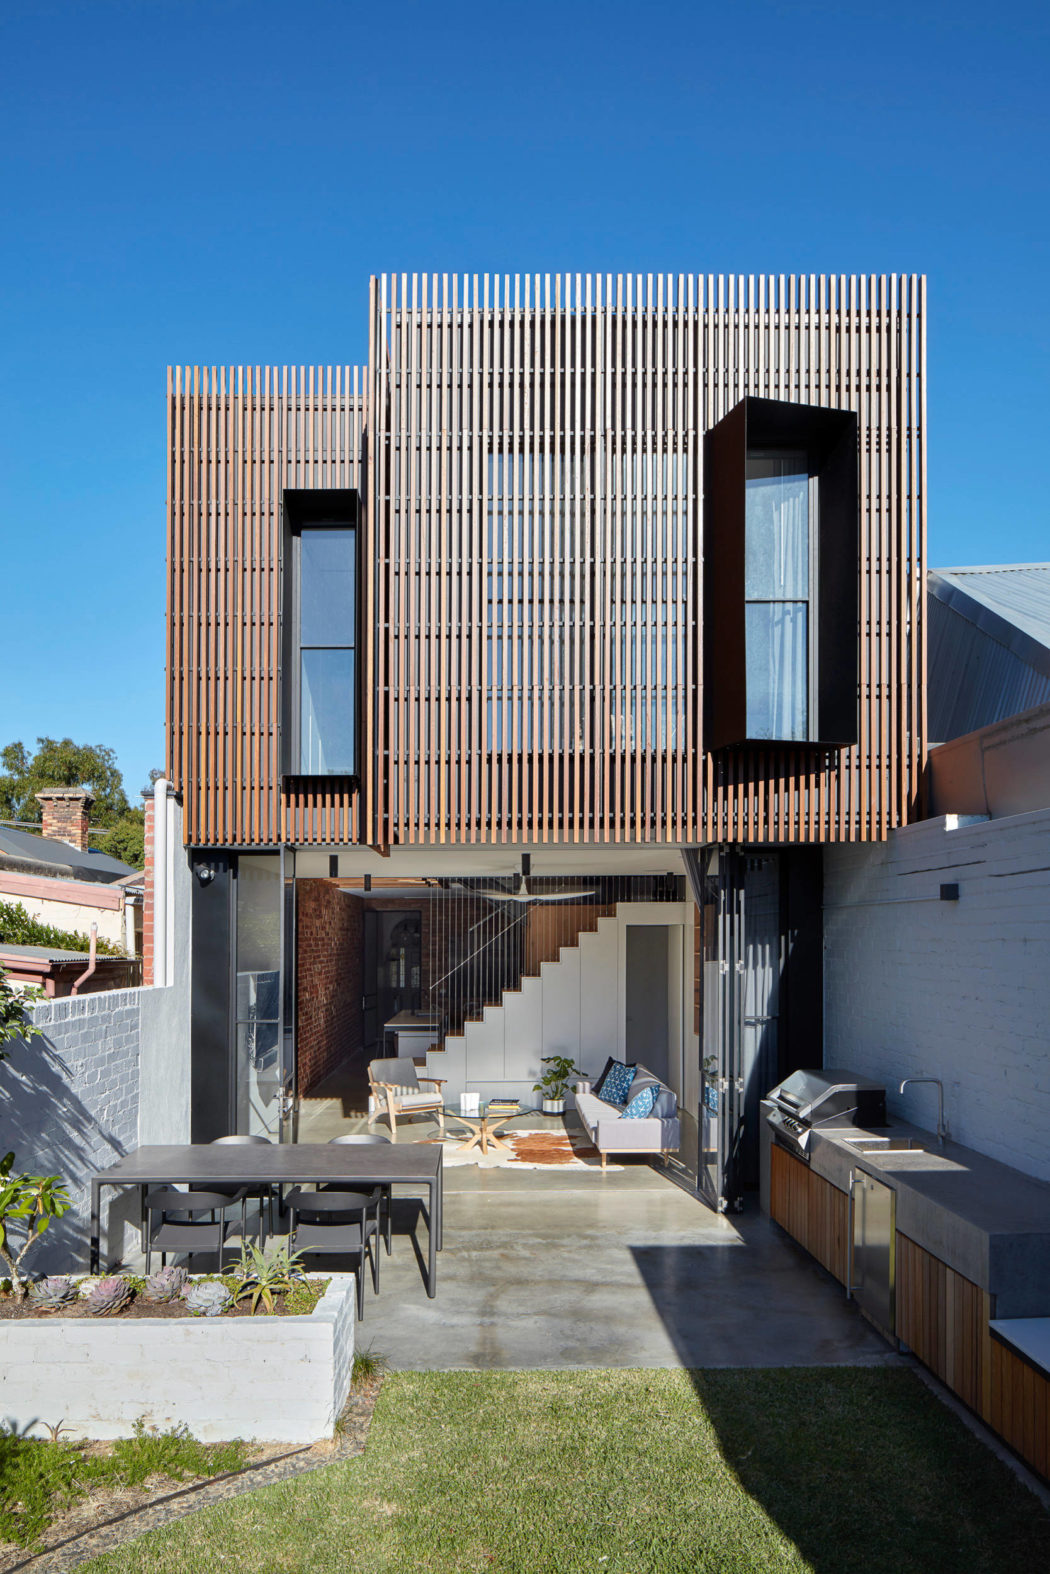 Modern two-story home with wooden slat facade and outdoor space.